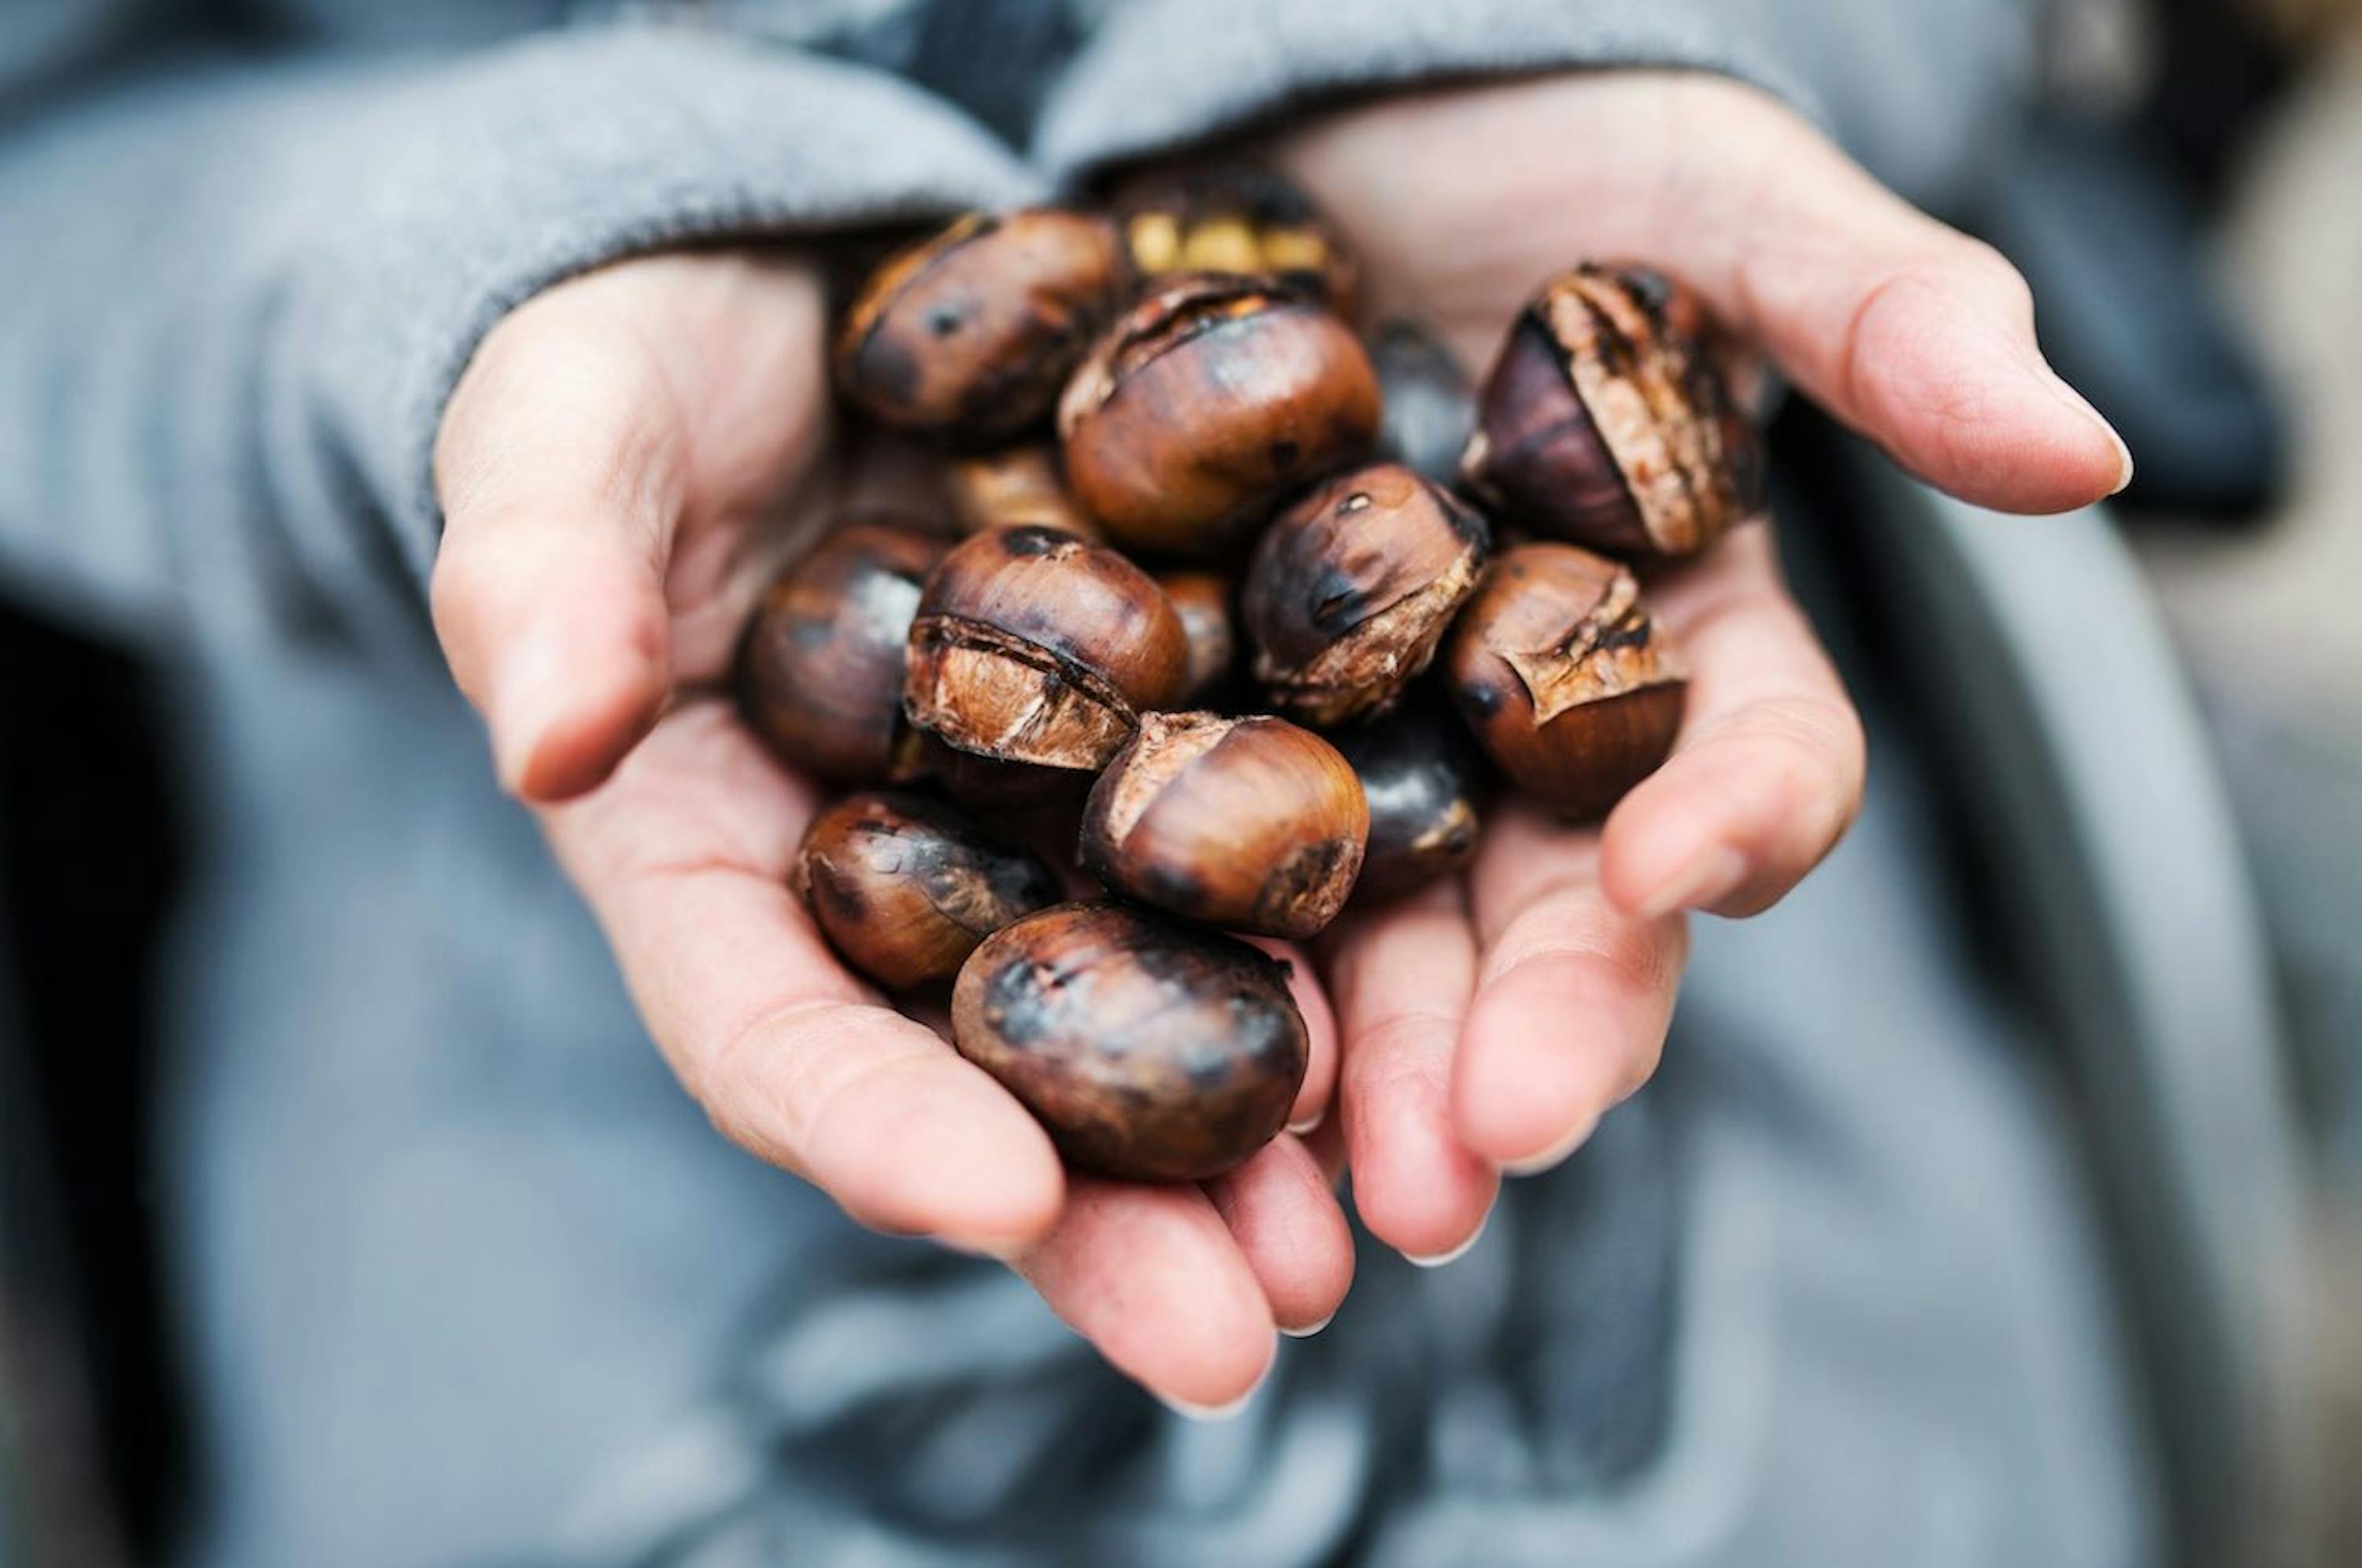 Chestnuts 101: Types and tasty preparations